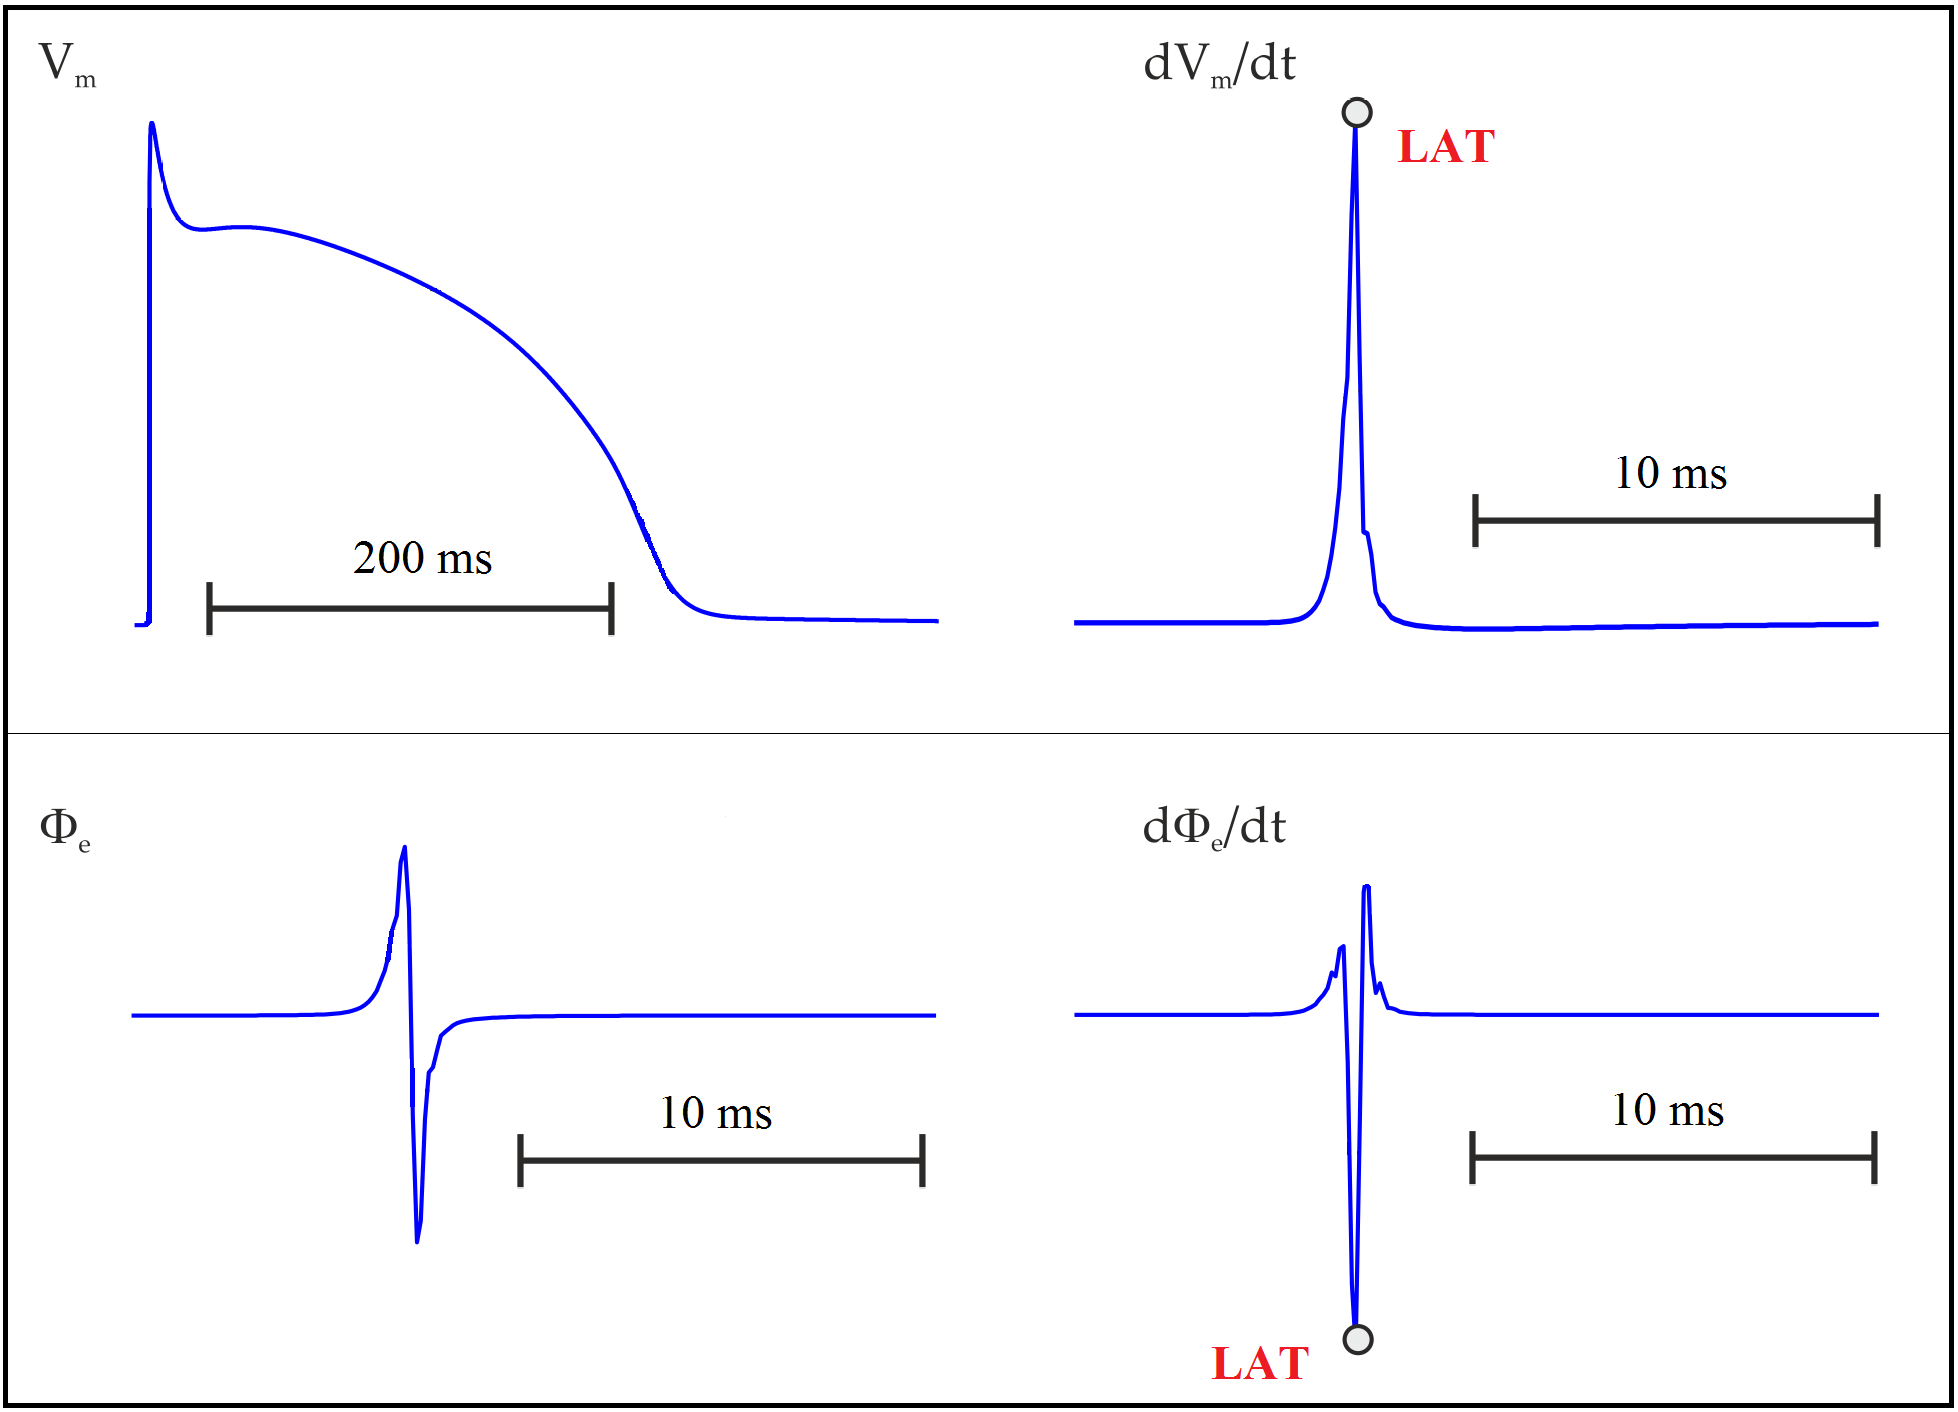 Action potential in an uncoupled cell. Upper panel: transmembrane potential V_{\mathrm m} and its time derivative \mathrm{d}V_{\mathrm m}/\mathrm{d}t. Lower panel: extracellular potential \phi_{\mathrm e} and its time derivative \mathrm{d}\phi_{\mathrm e}/\mathrm{d}t. LAT is usually taken as the time of maximum \mathrm{d}V_{\mathrm m}/\mathrm{d}t or the minimum \mathrm{d}\phi_{\mathrm e}/\mathrm{d}t.